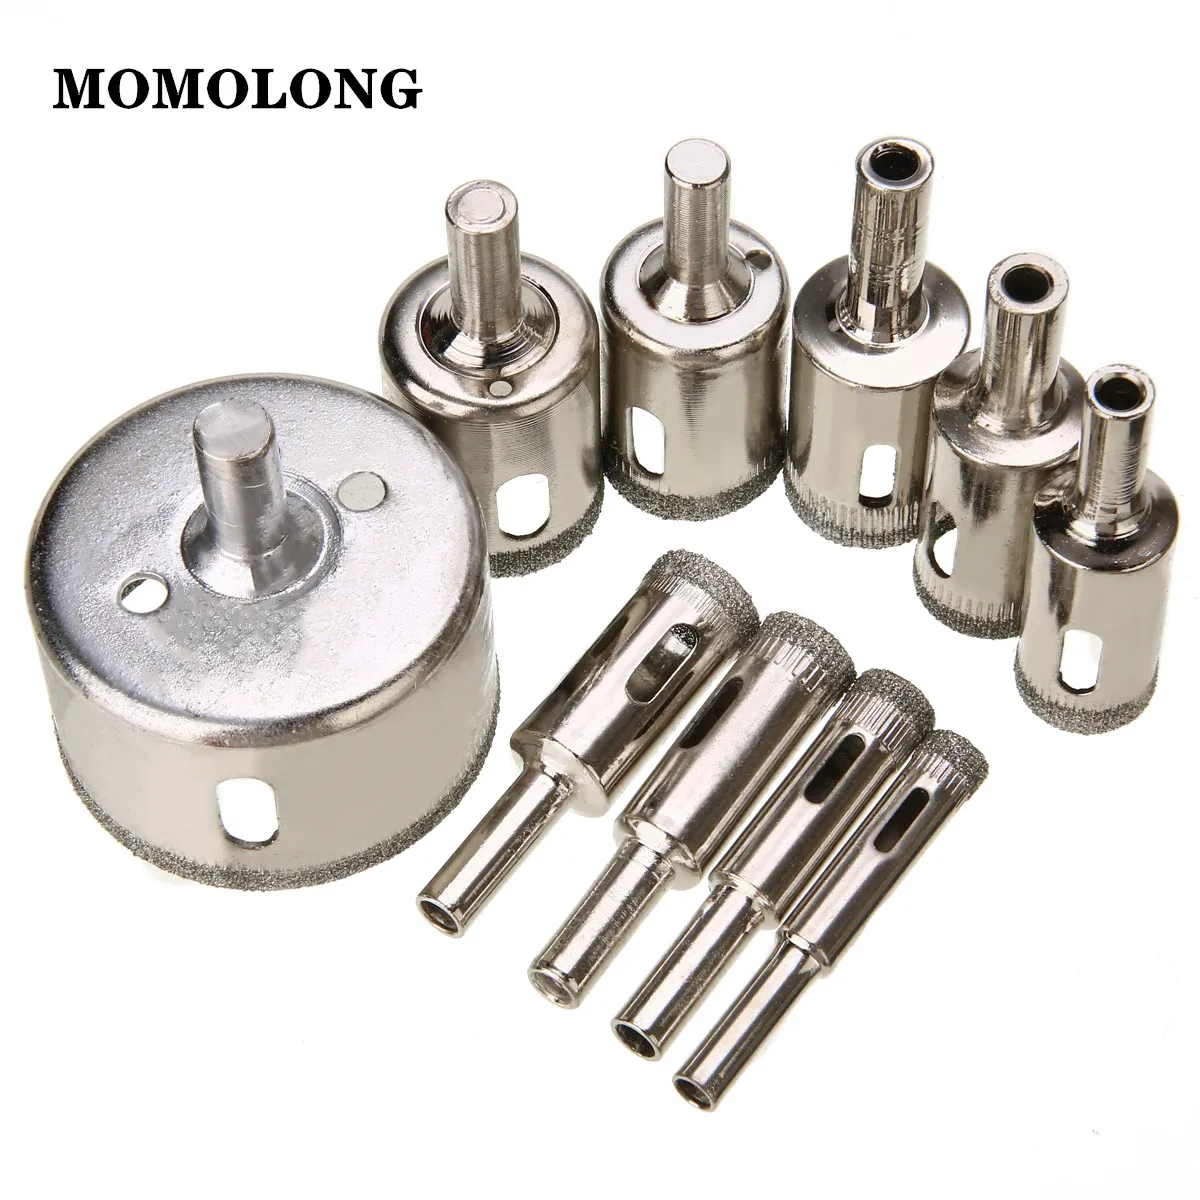 10/15/30Pcs Diamond Coated Drill Bit  Glass Ceramic Hole Saw  3-50mm Drilling Bits For Tile Marble Glass Ceramic For Power Tools